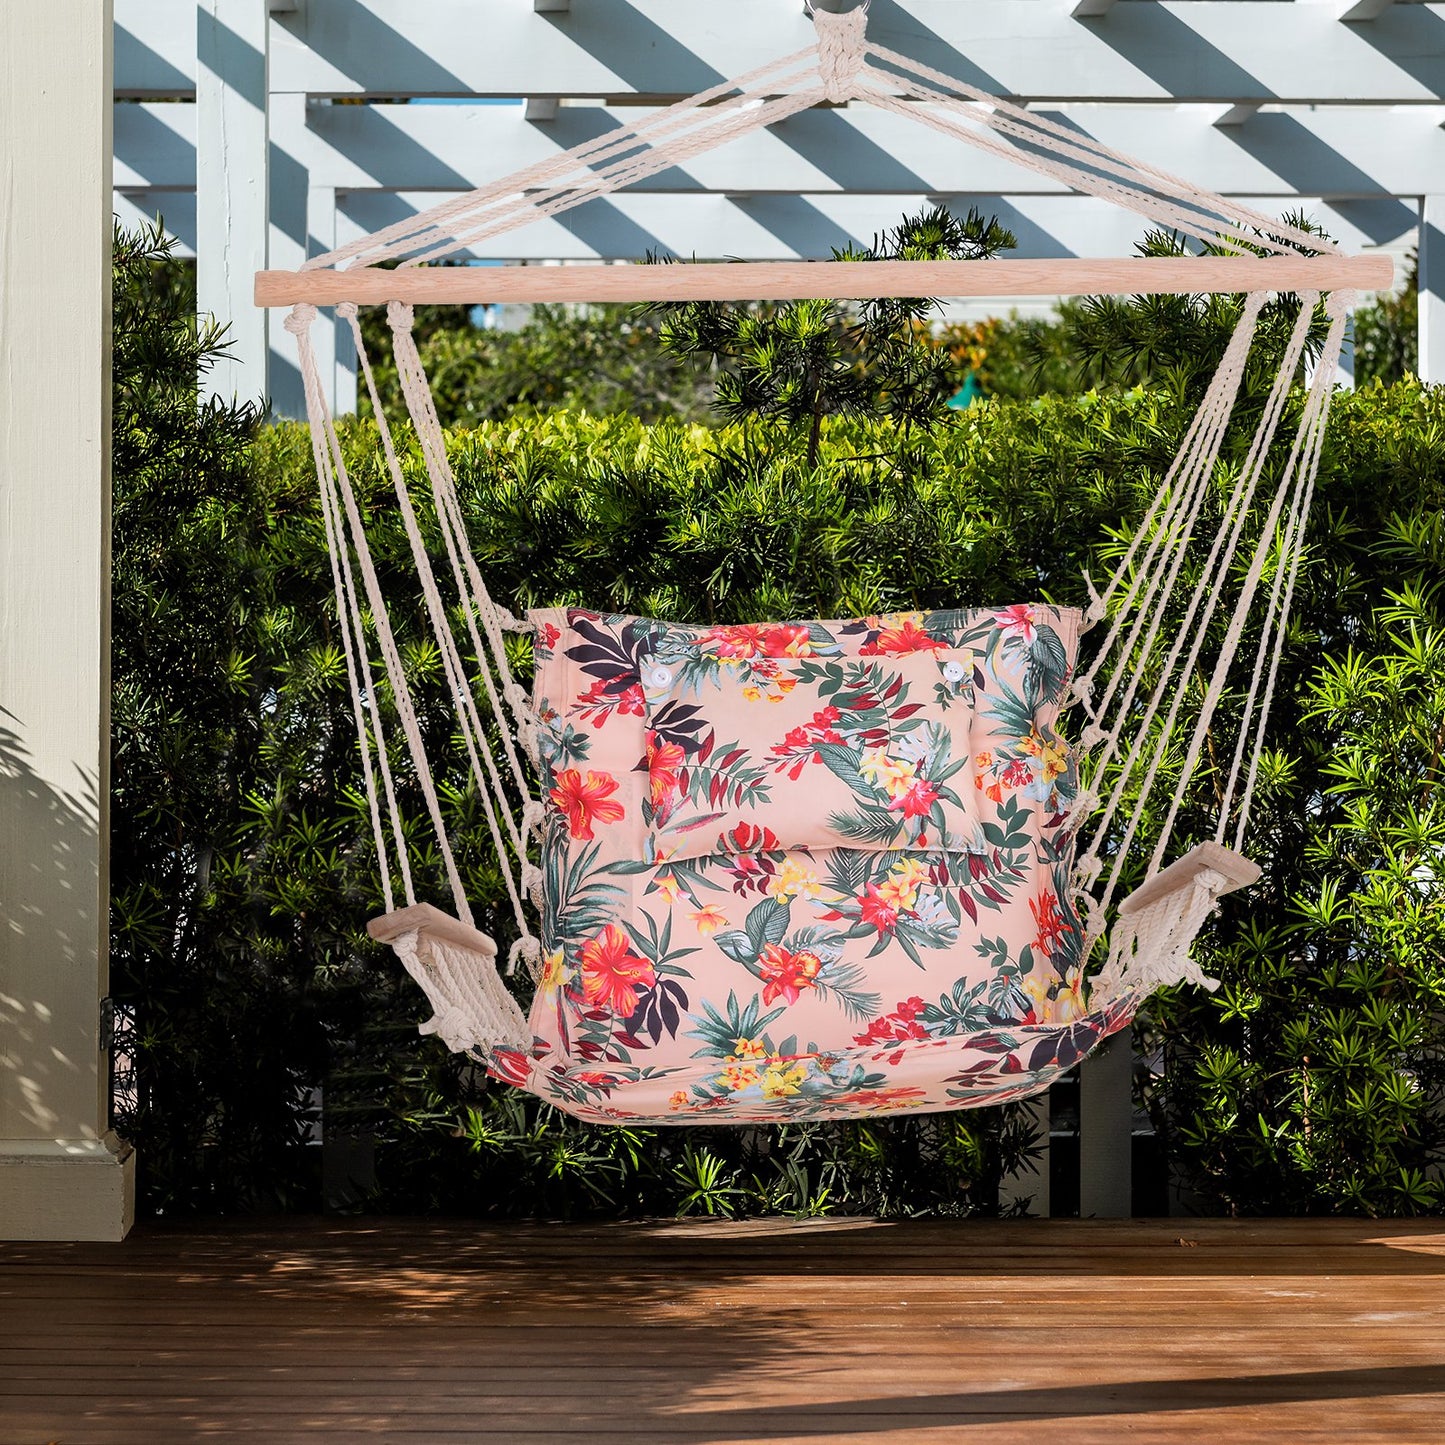 Outsunny 100x106cm Hanging Hammock Chair Safe Rope Frame Pillow Top Bar Bright Floral